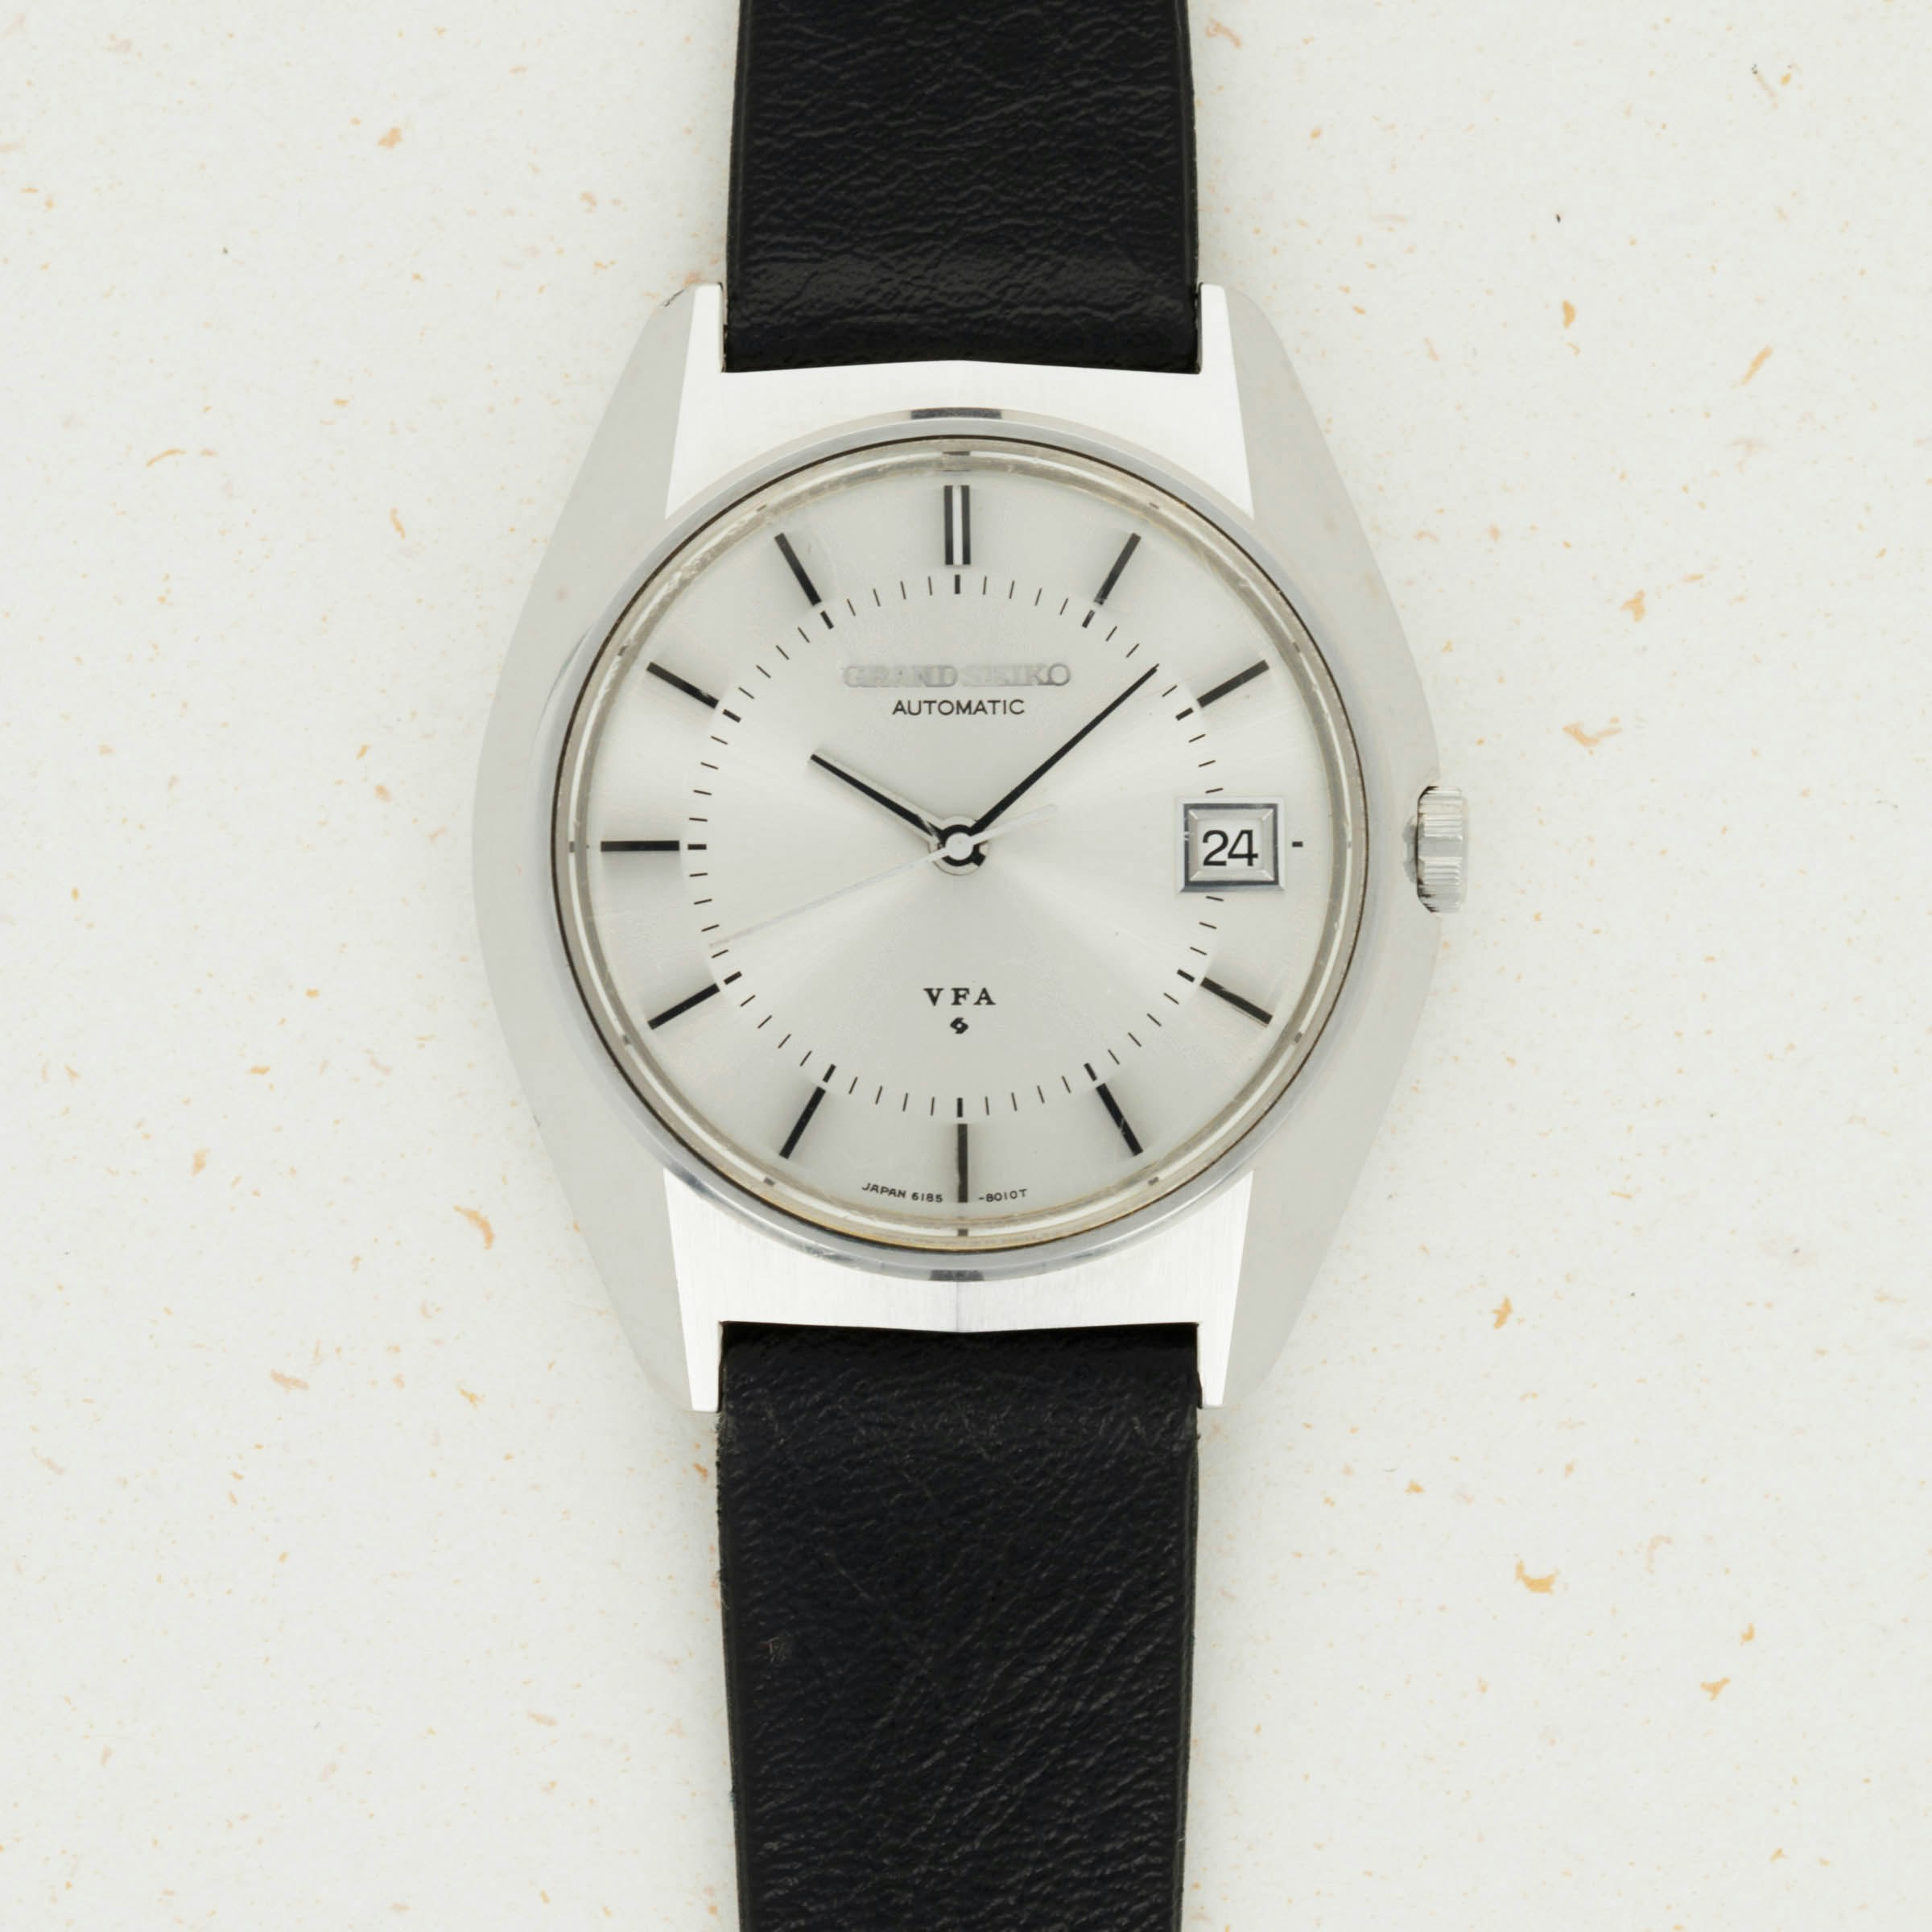 Grand Seiko 6185-8021 | Auctions | Loupe This